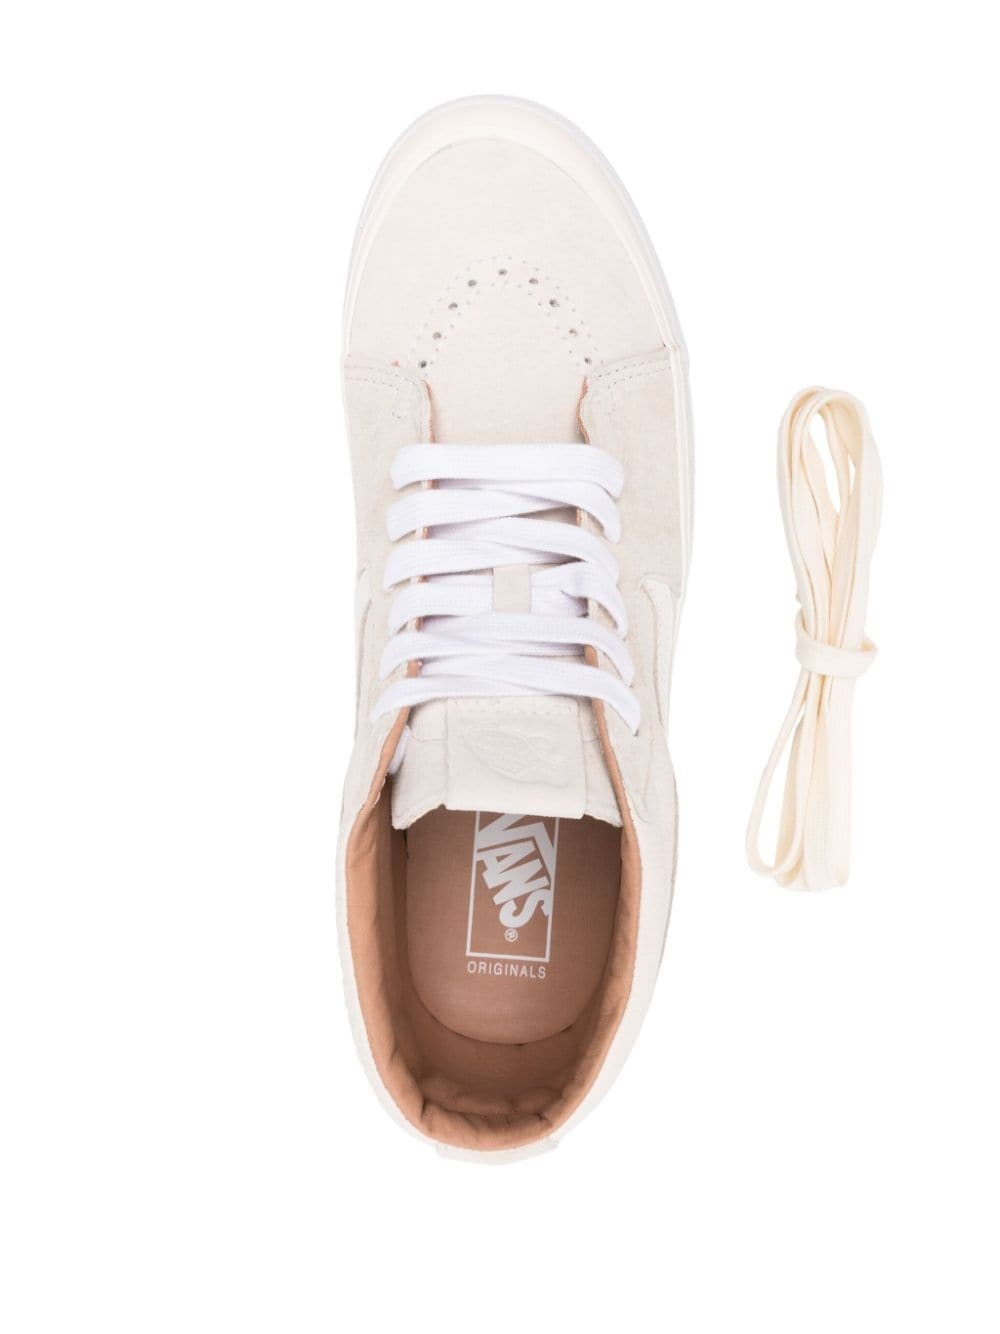 OG SK8-MID LX leather sneakers - 4